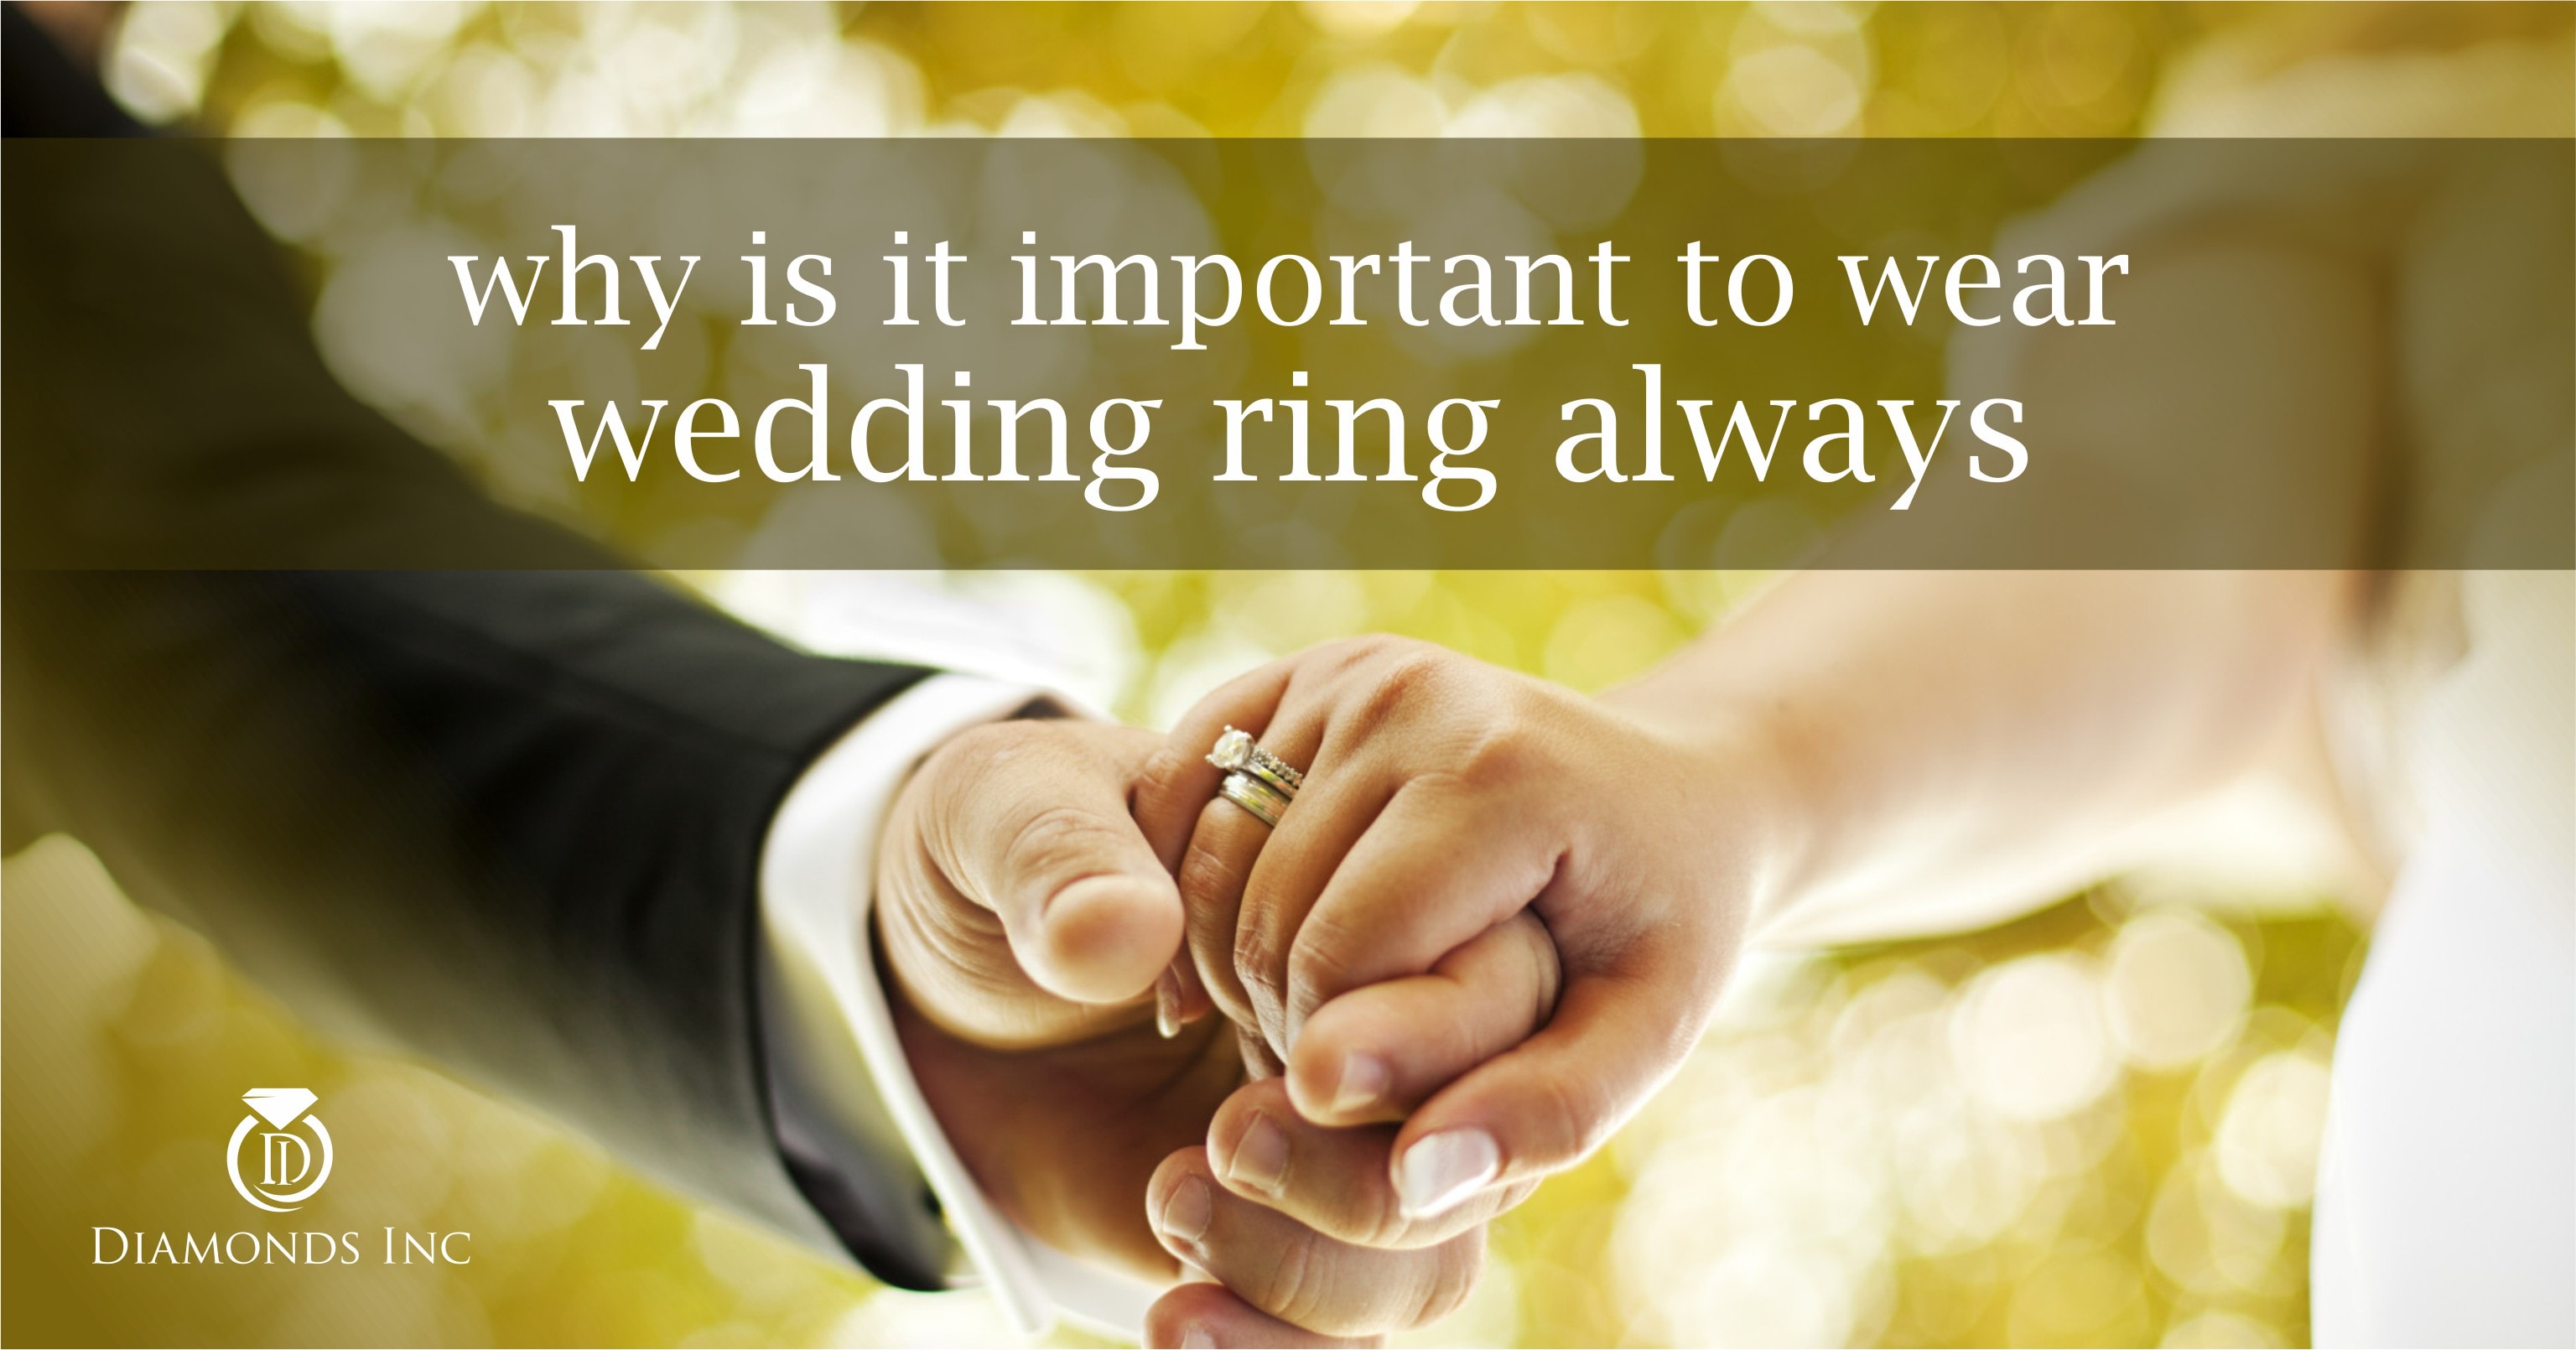 Why Is It Important To Wear Wedding Ring Always?